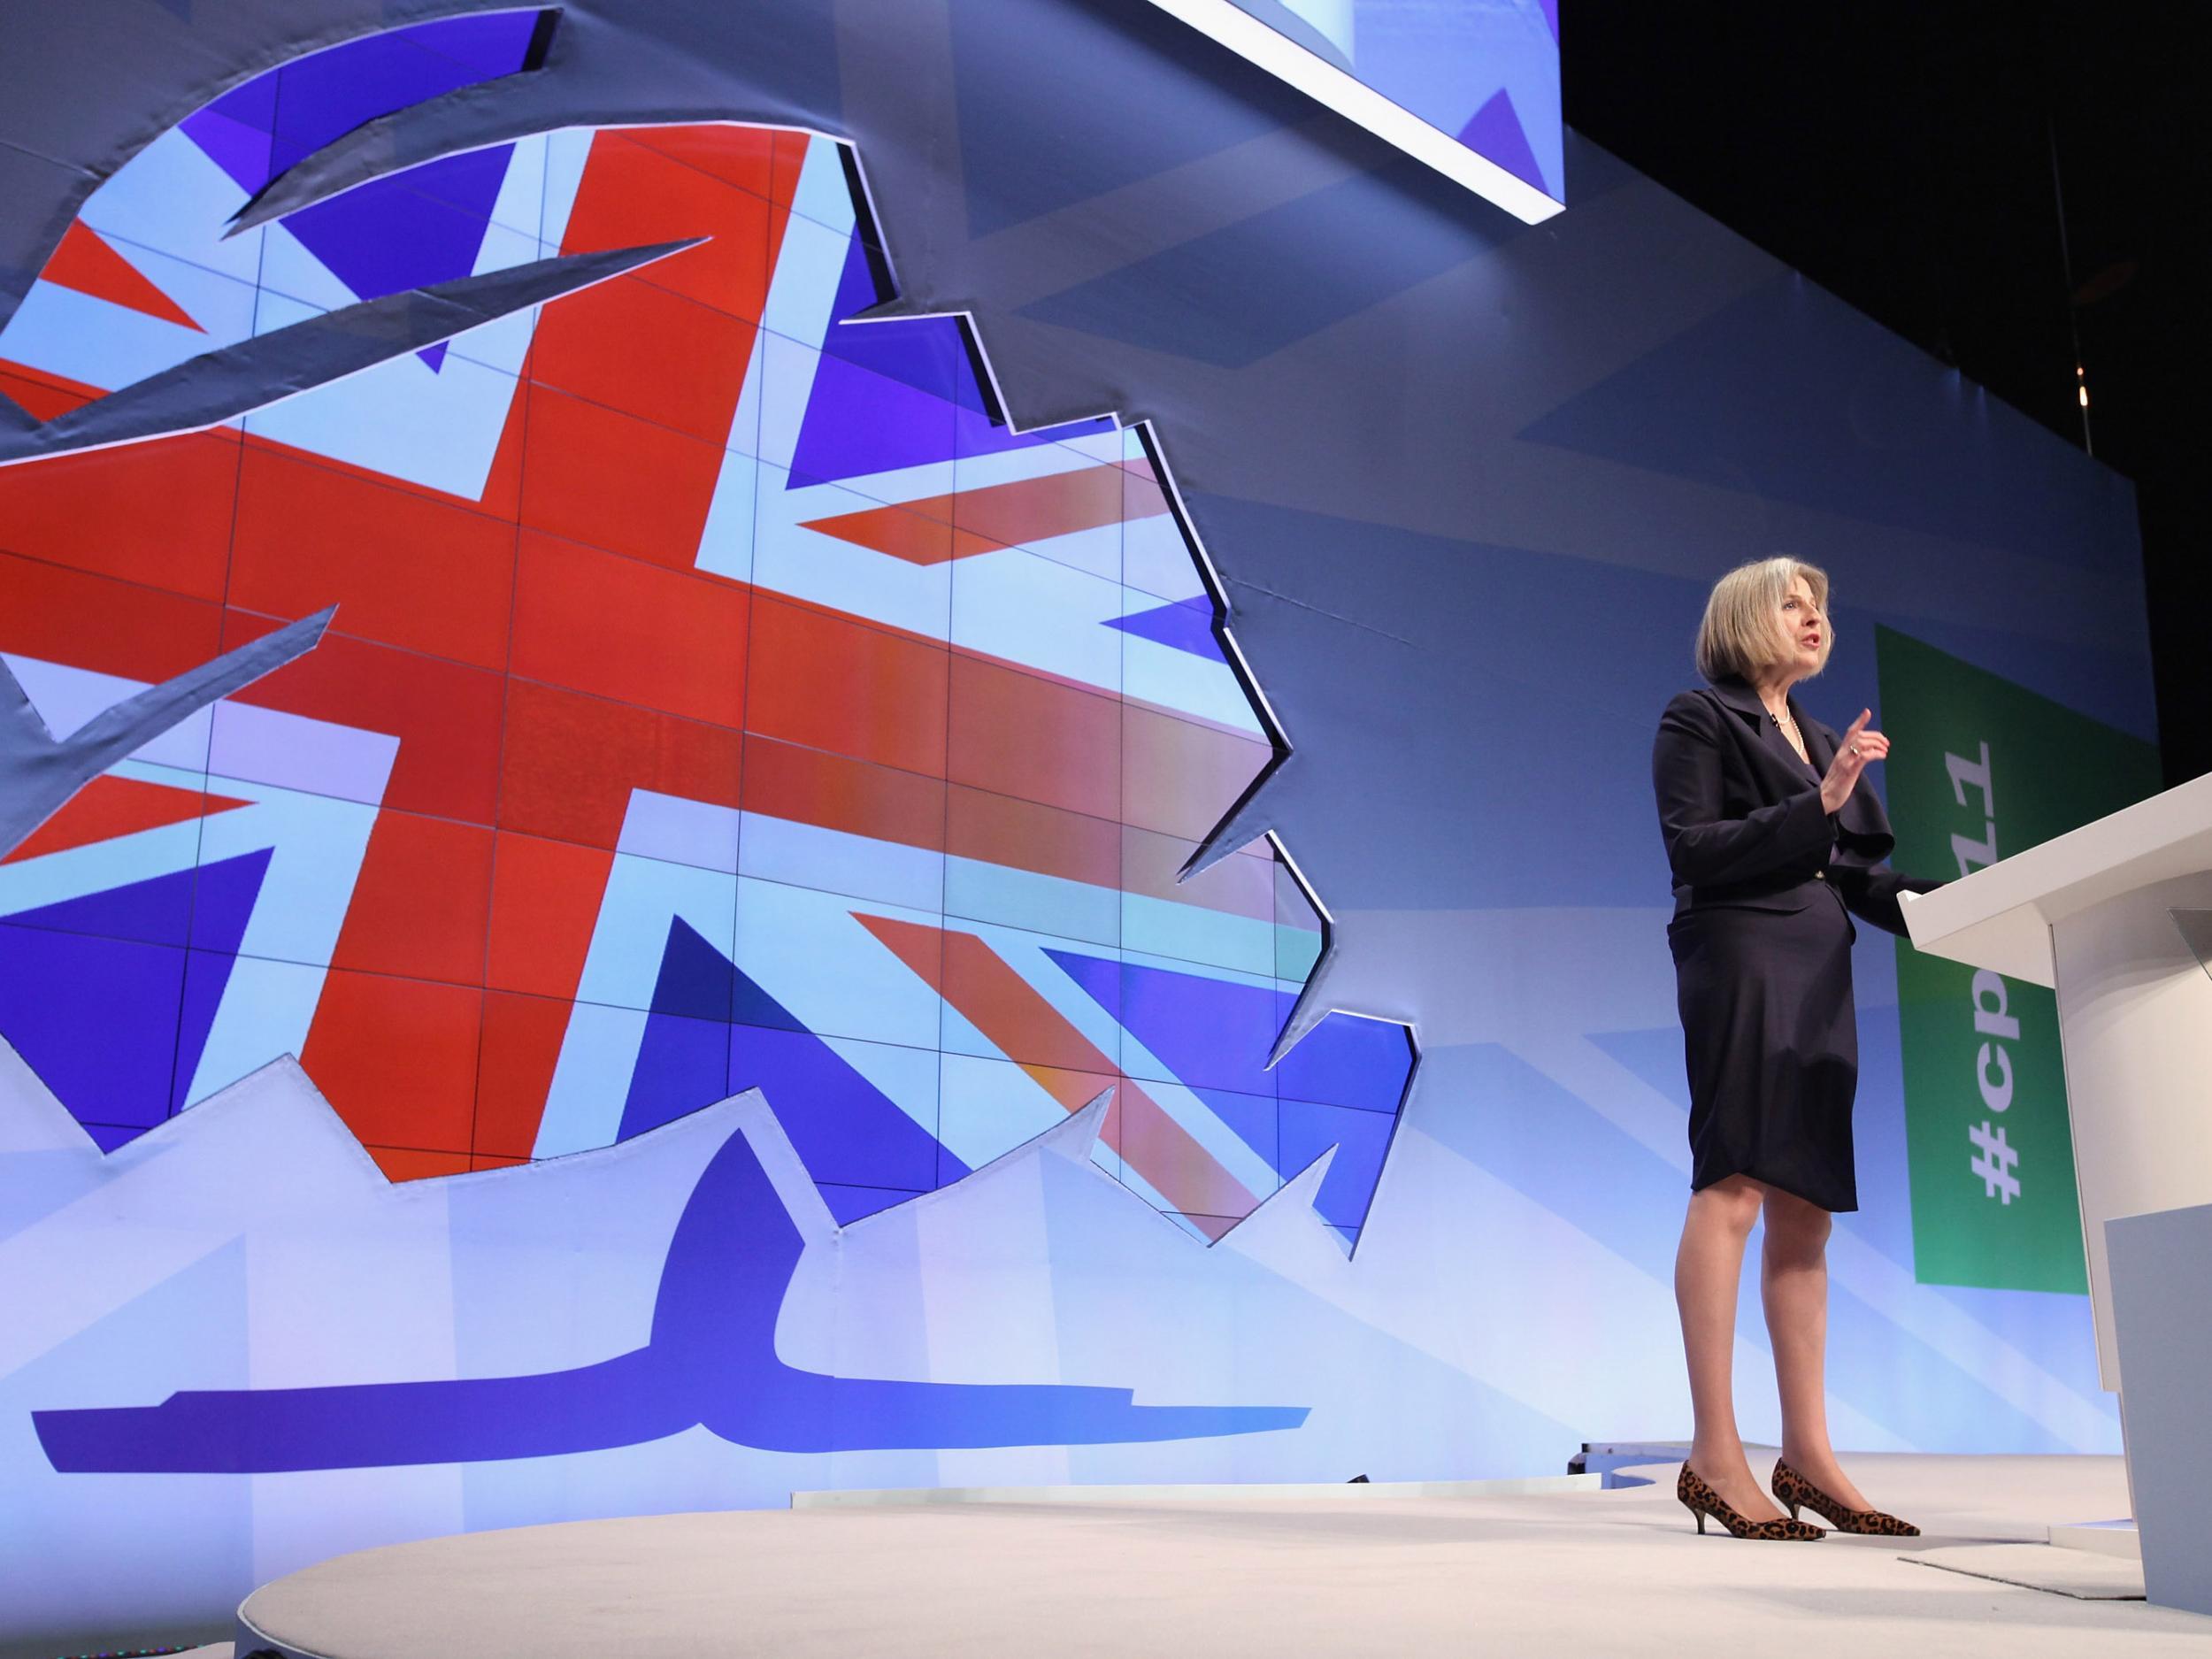 During her speech at the 2011 Conservative Party conference, Theresa May announced plans to clamp down on illegal immigrants hiding behind the human rights act